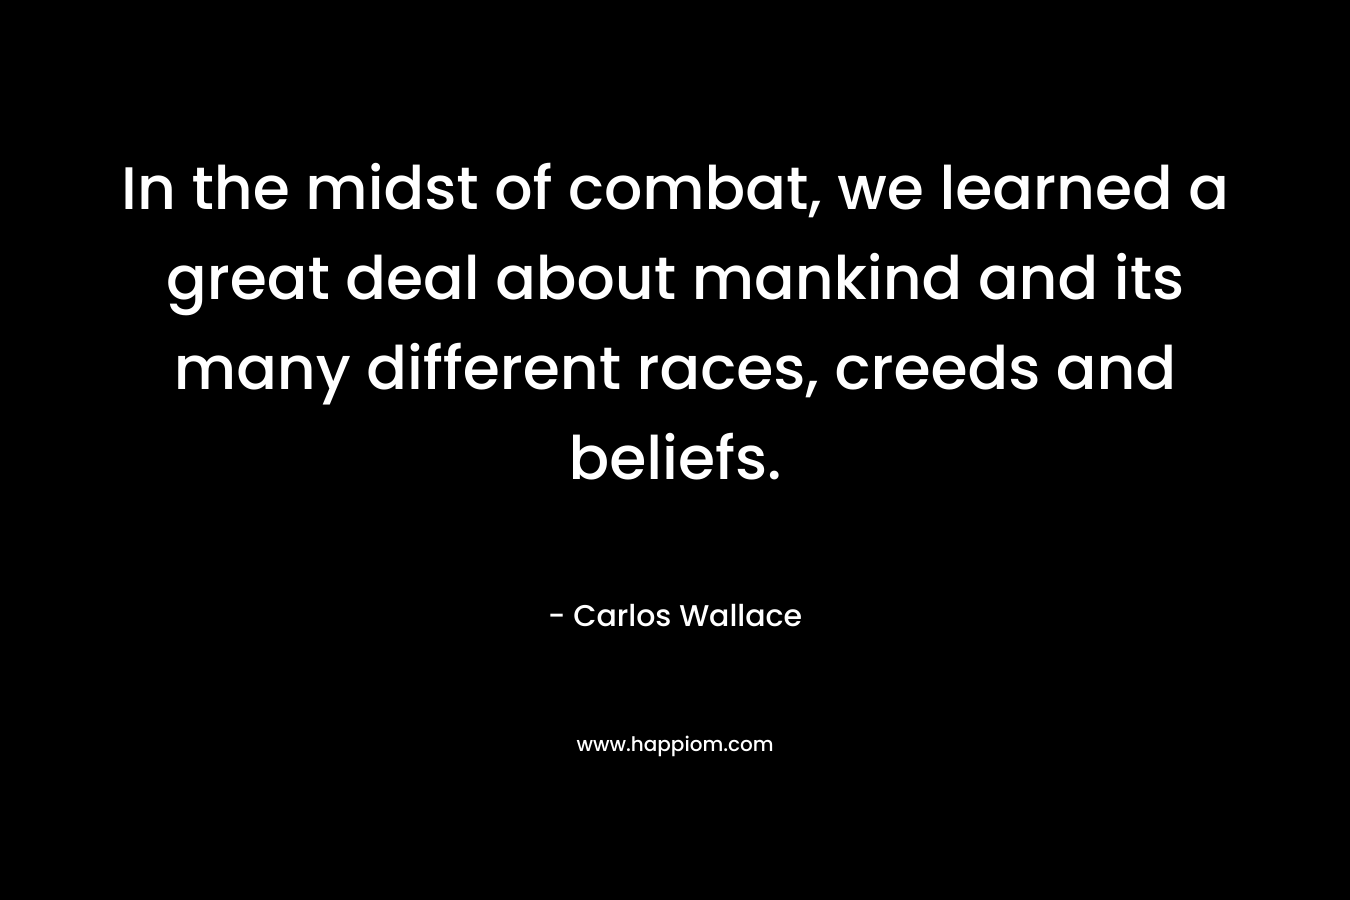 In the midst of combat, we learned a great deal about mankind and its many different races, creeds and beliefs.